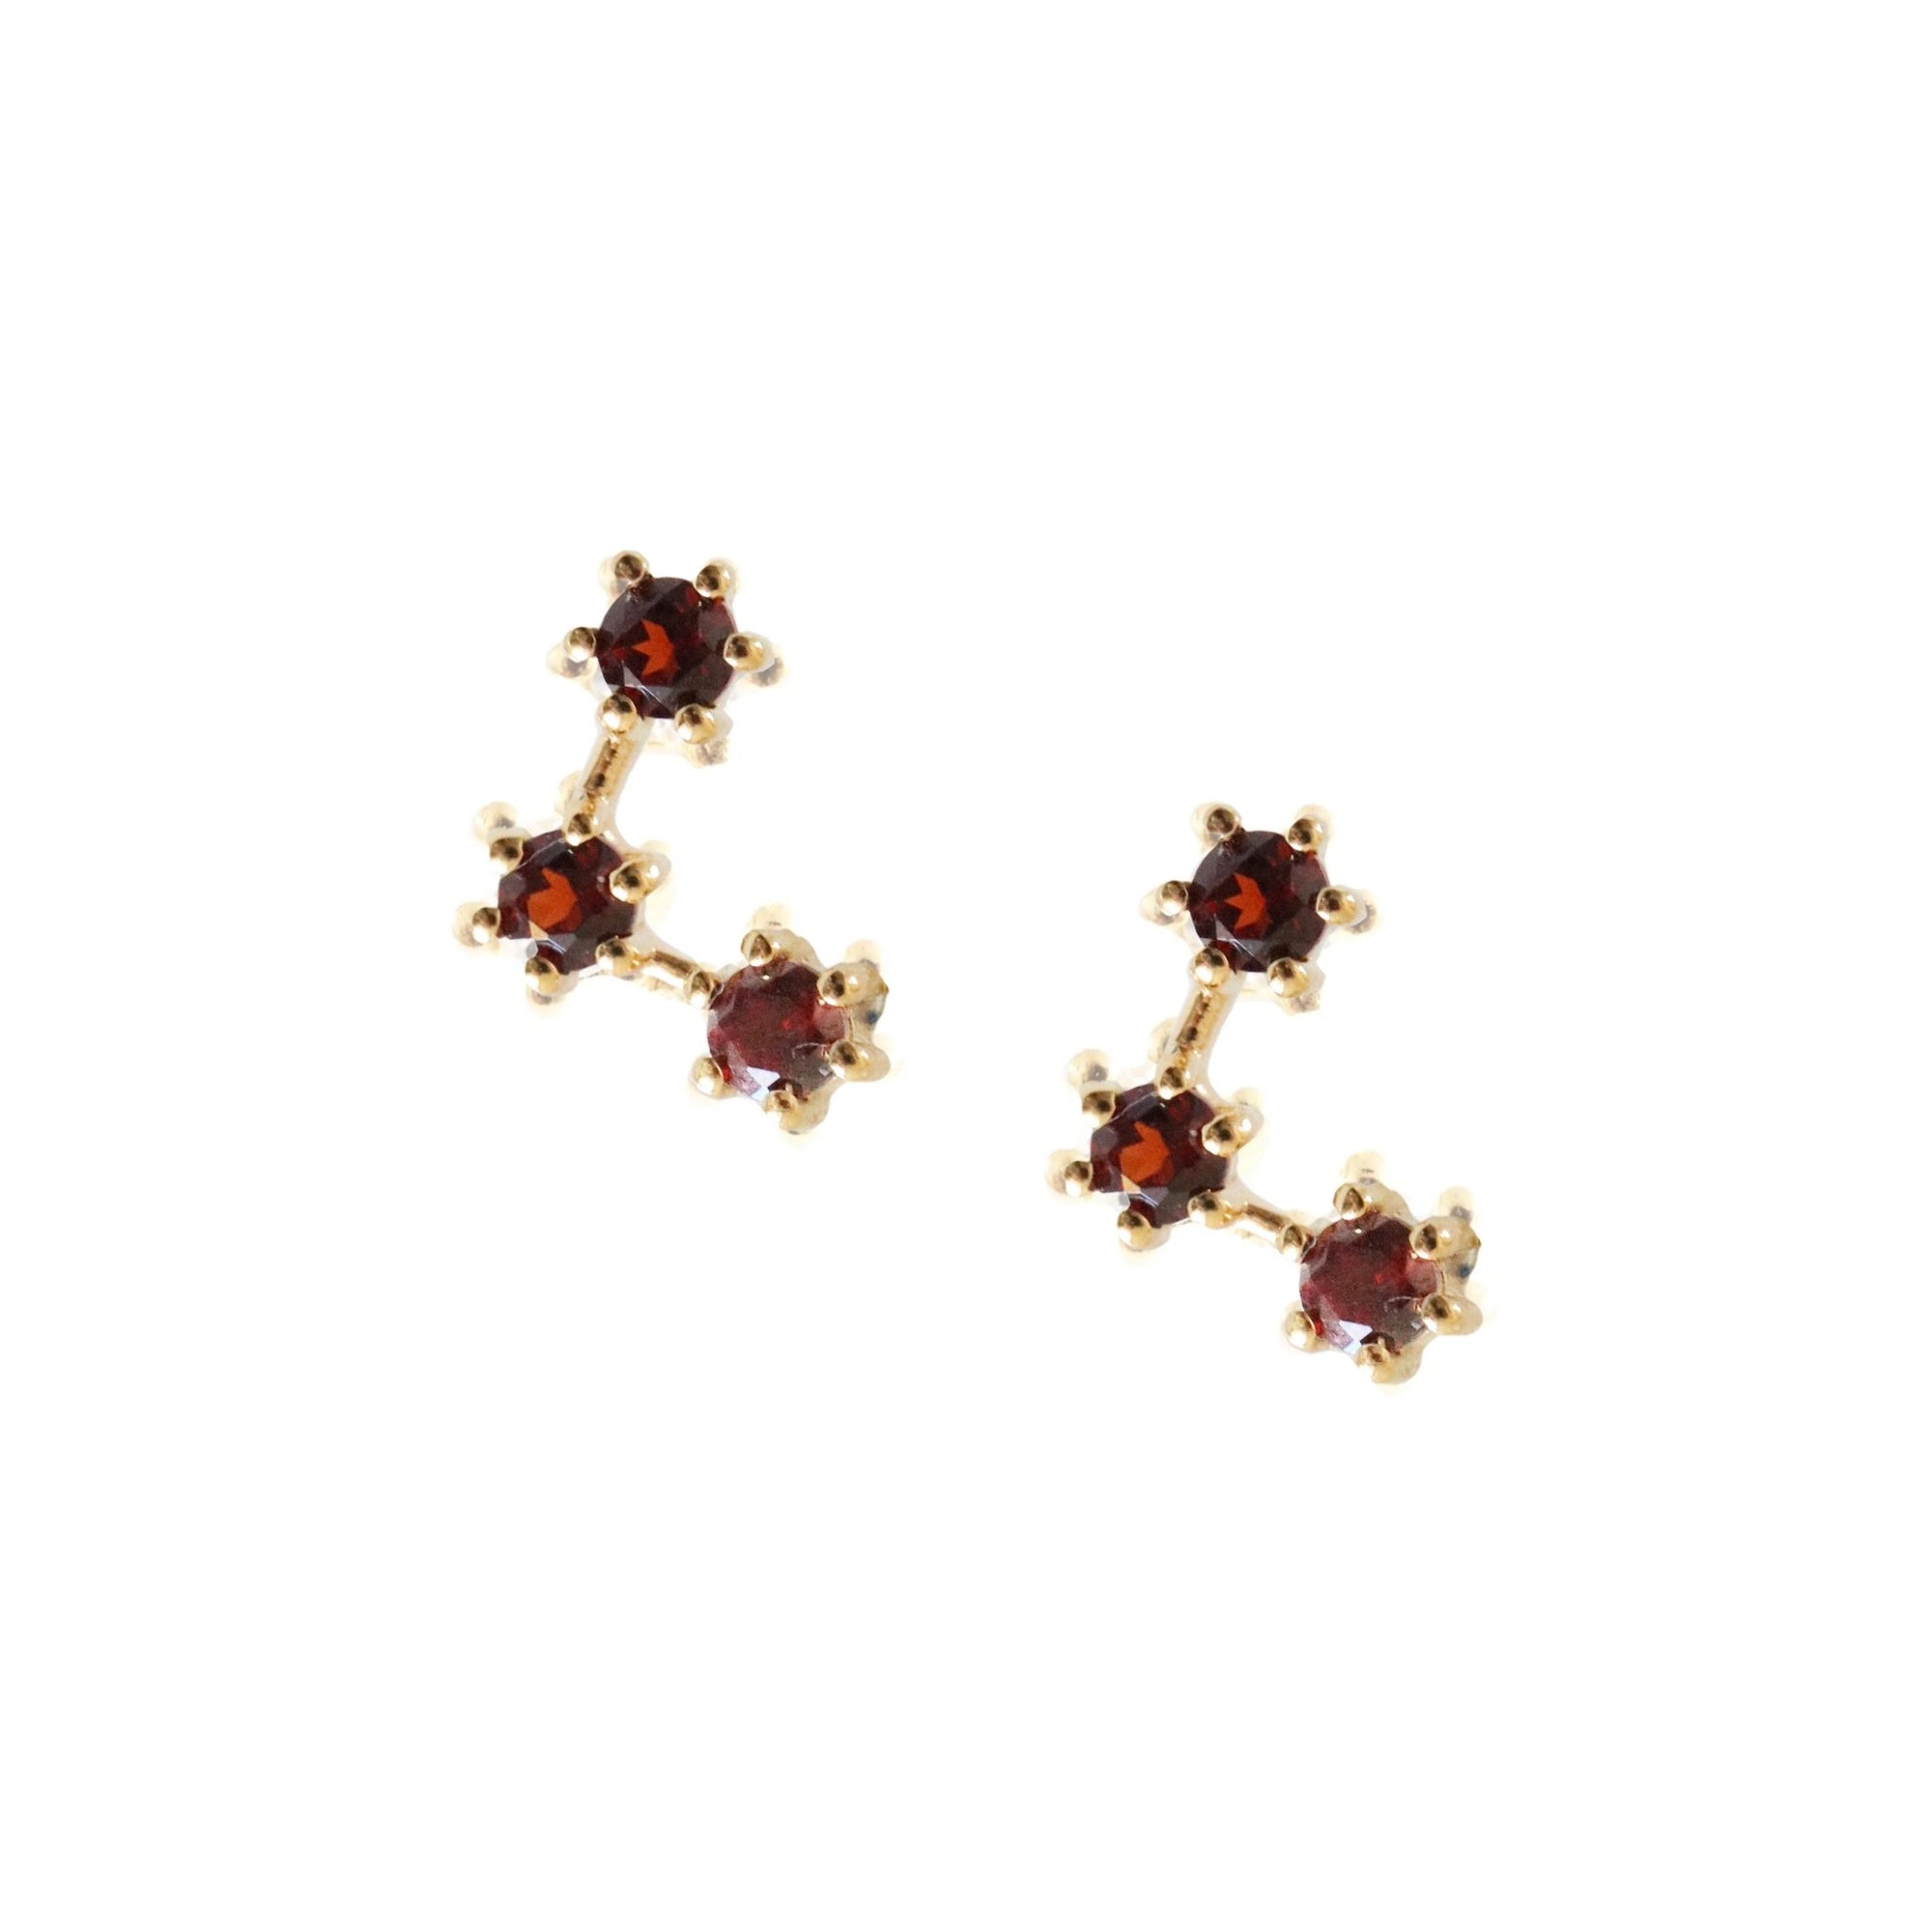 DAY 4 - DREAM CONSTELLATION STUDS - RUBY RED GARNET & GOLD - SO PRETTY CARA COTTER